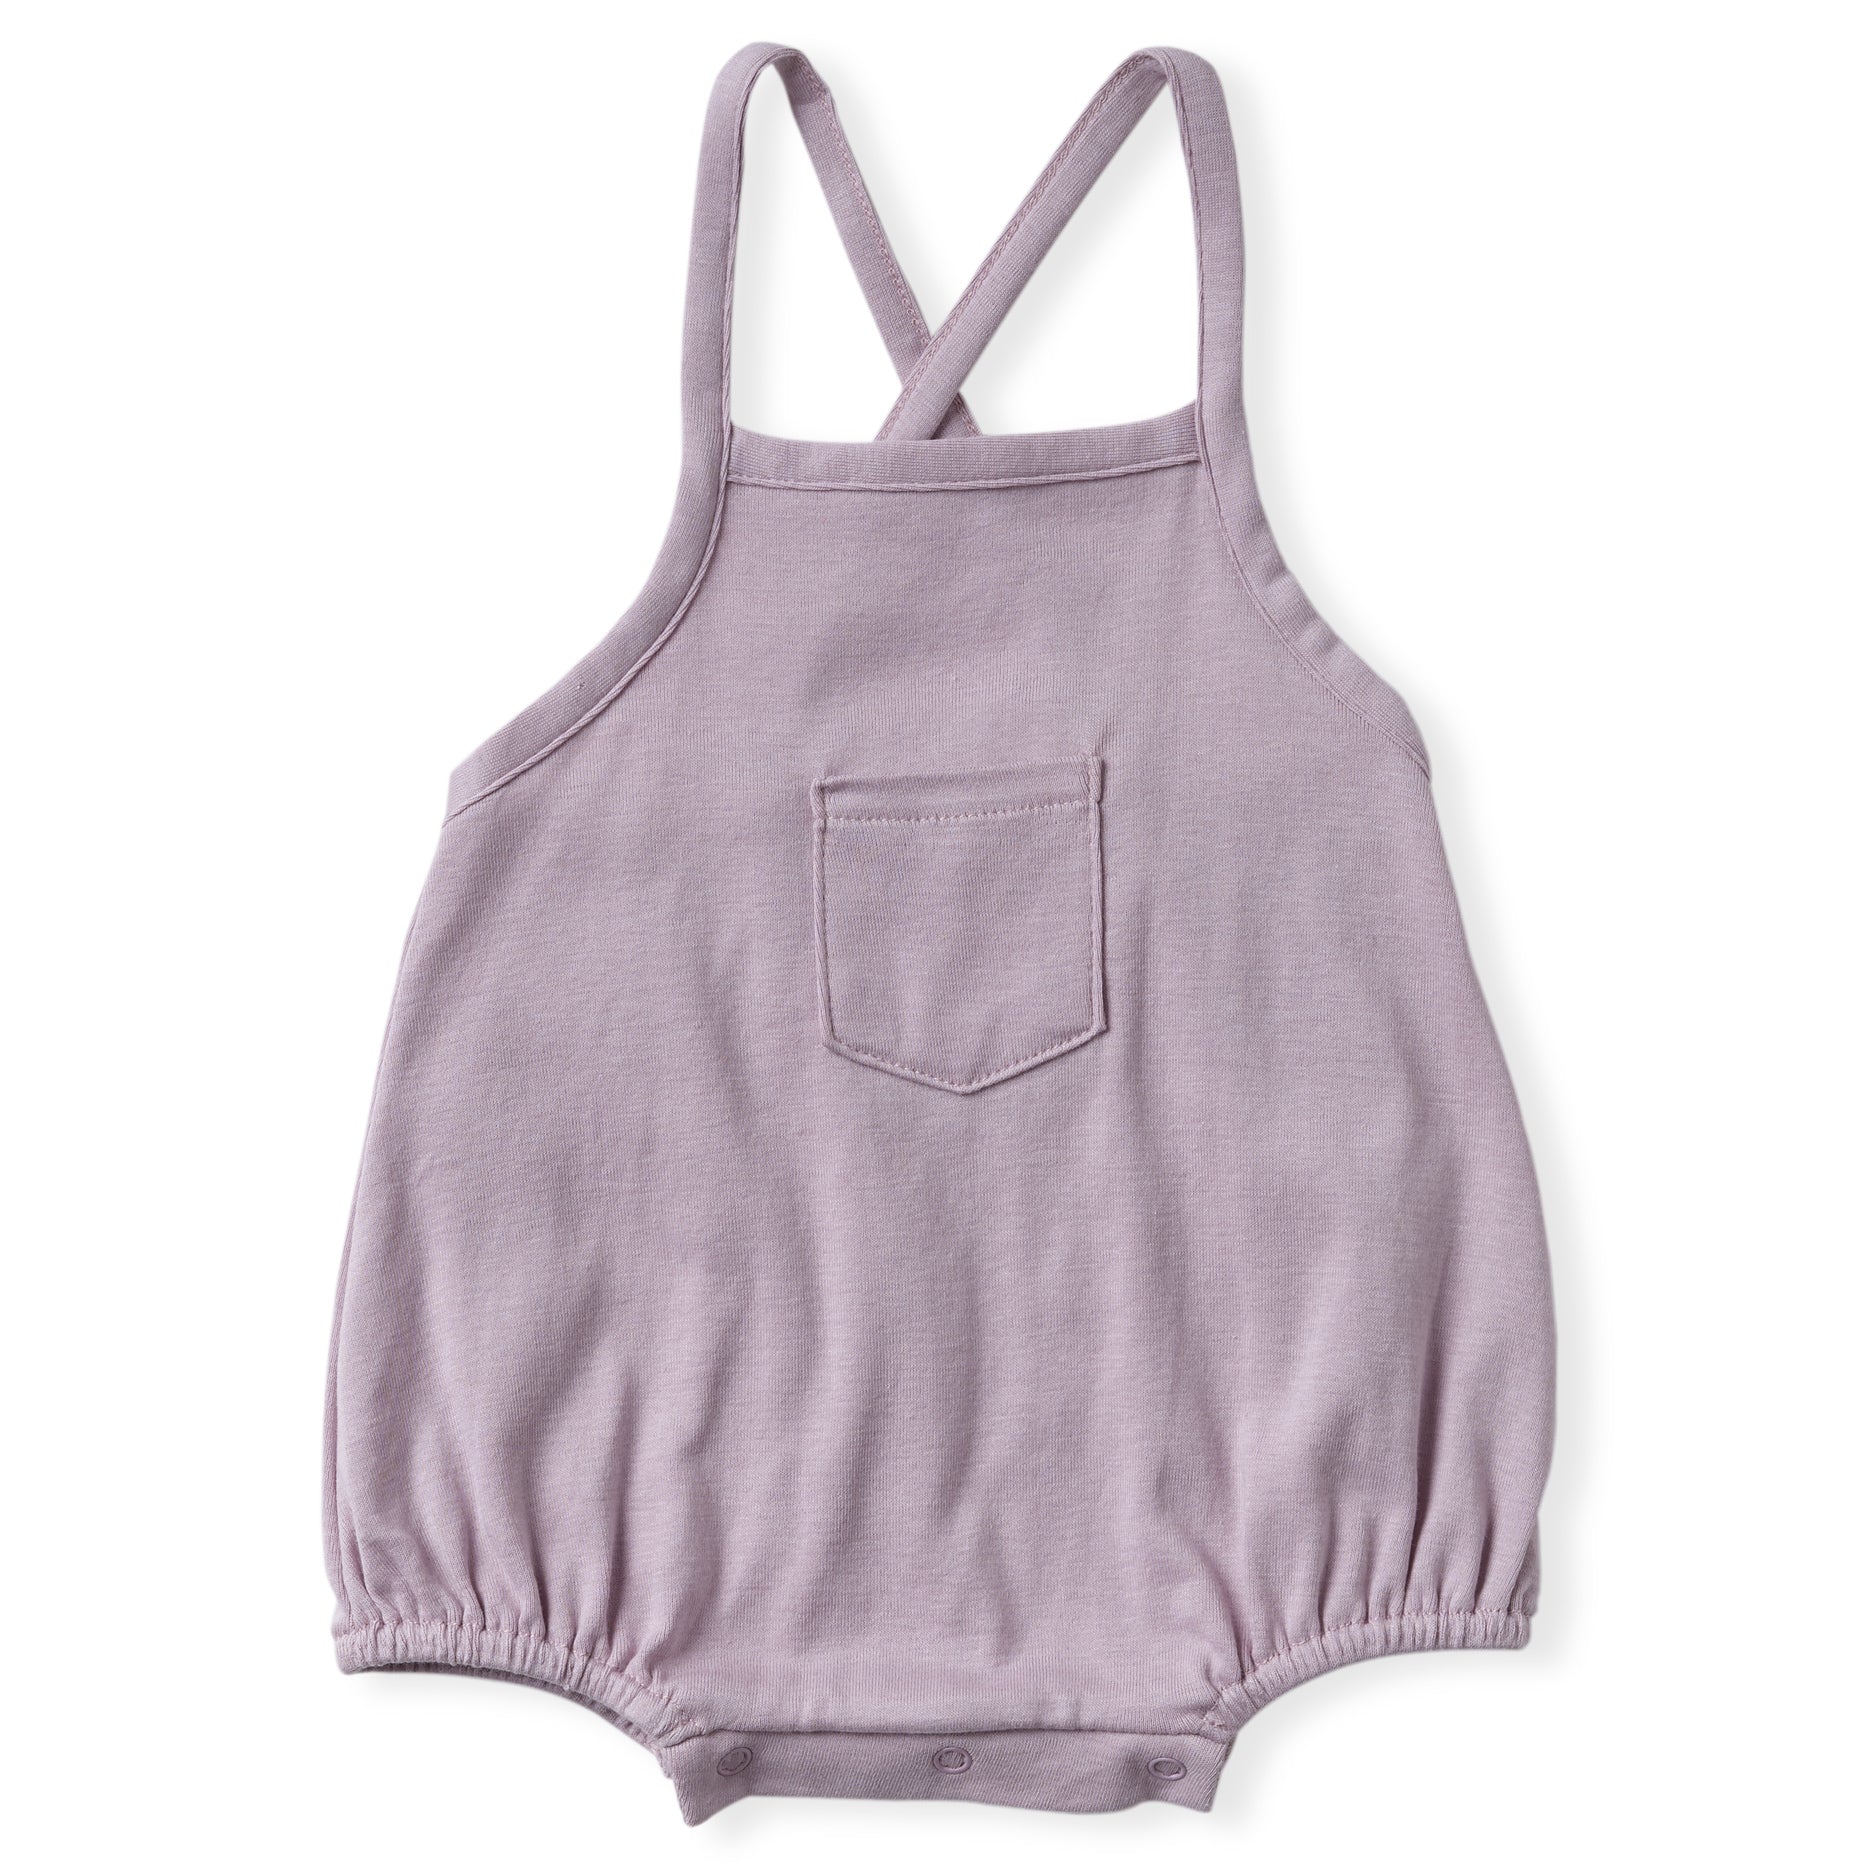 lavender color cross back tank romper with one front pocket and soft encased elastics at leg opening.  100% organic pima cotton ribbed knit.